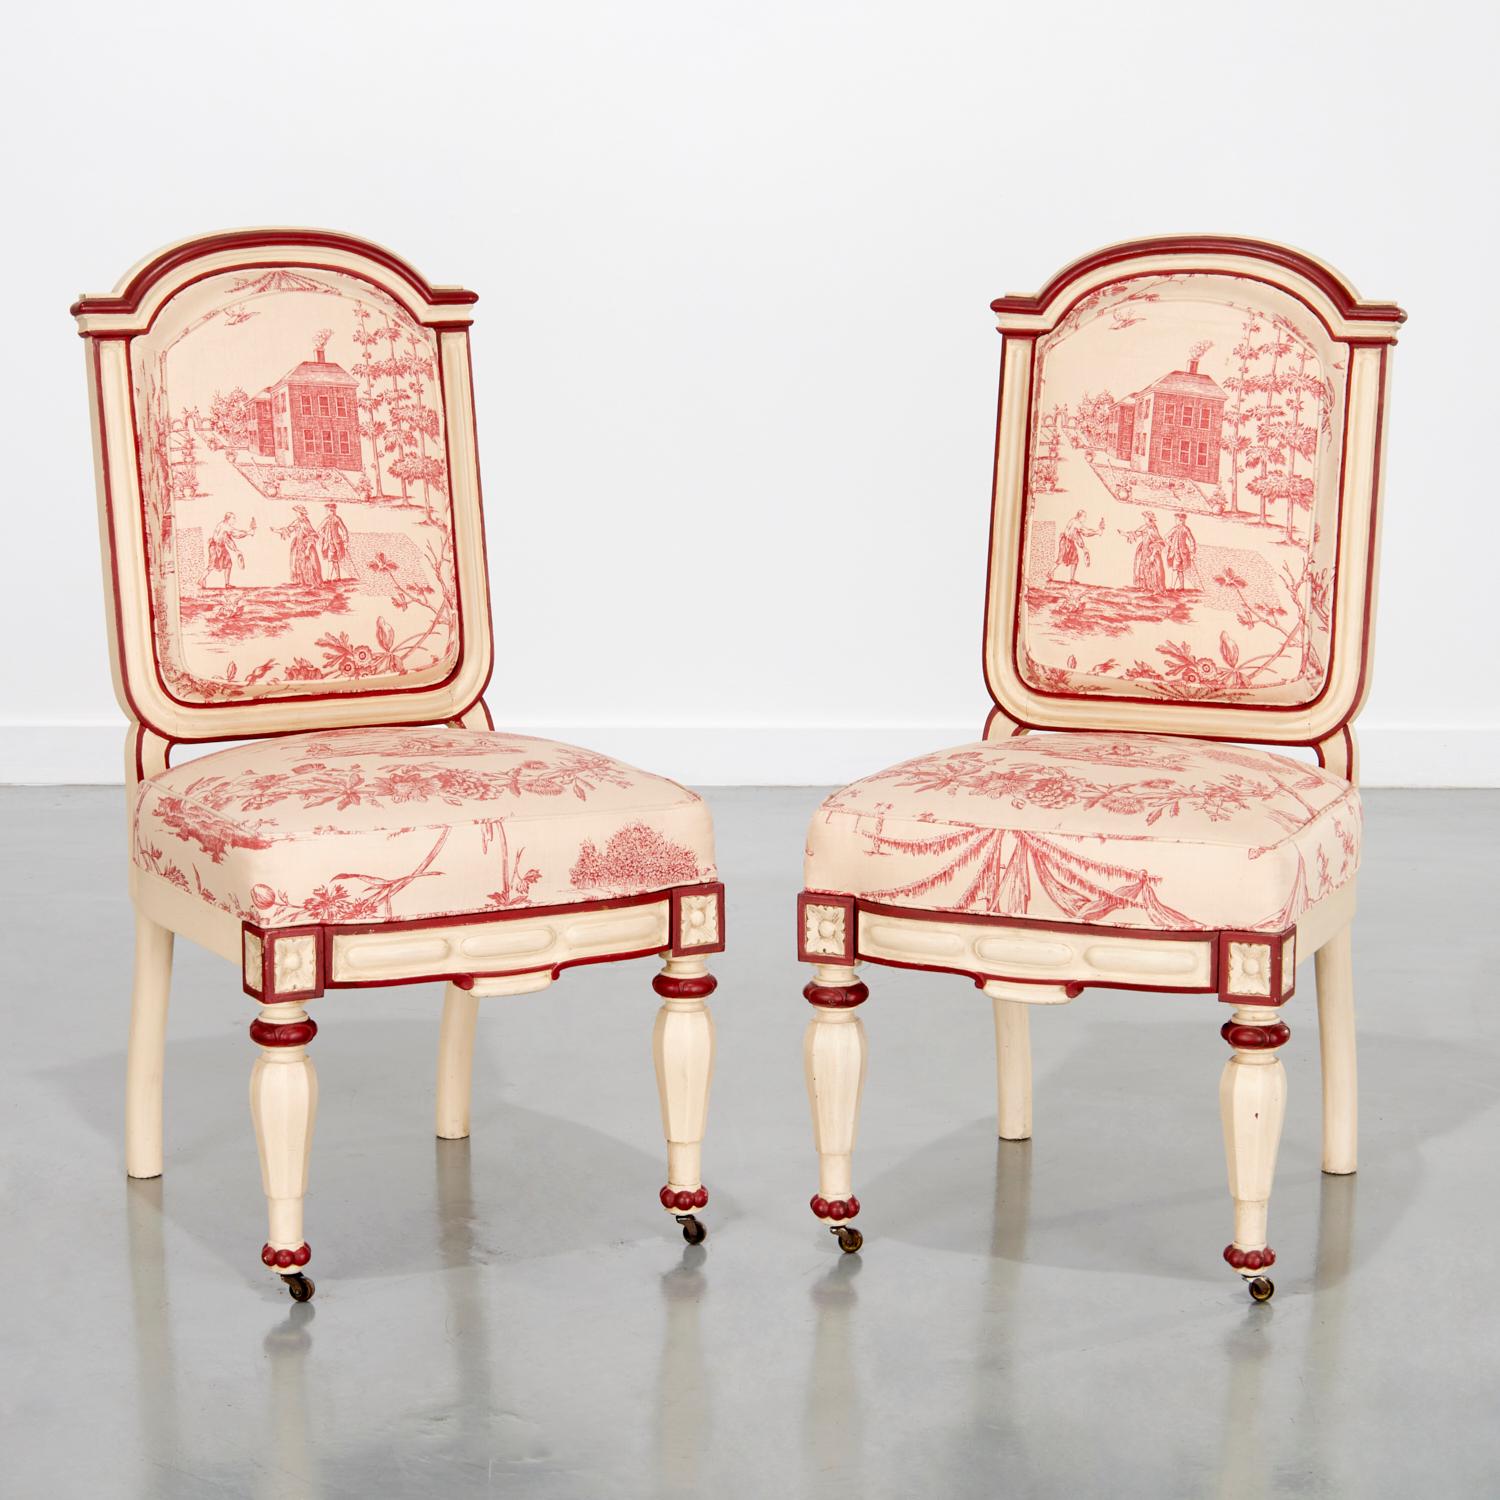 A Pair of Victorian Side Chairs - Cream and Red Painted Frame and Toile Fabric For Sale 1